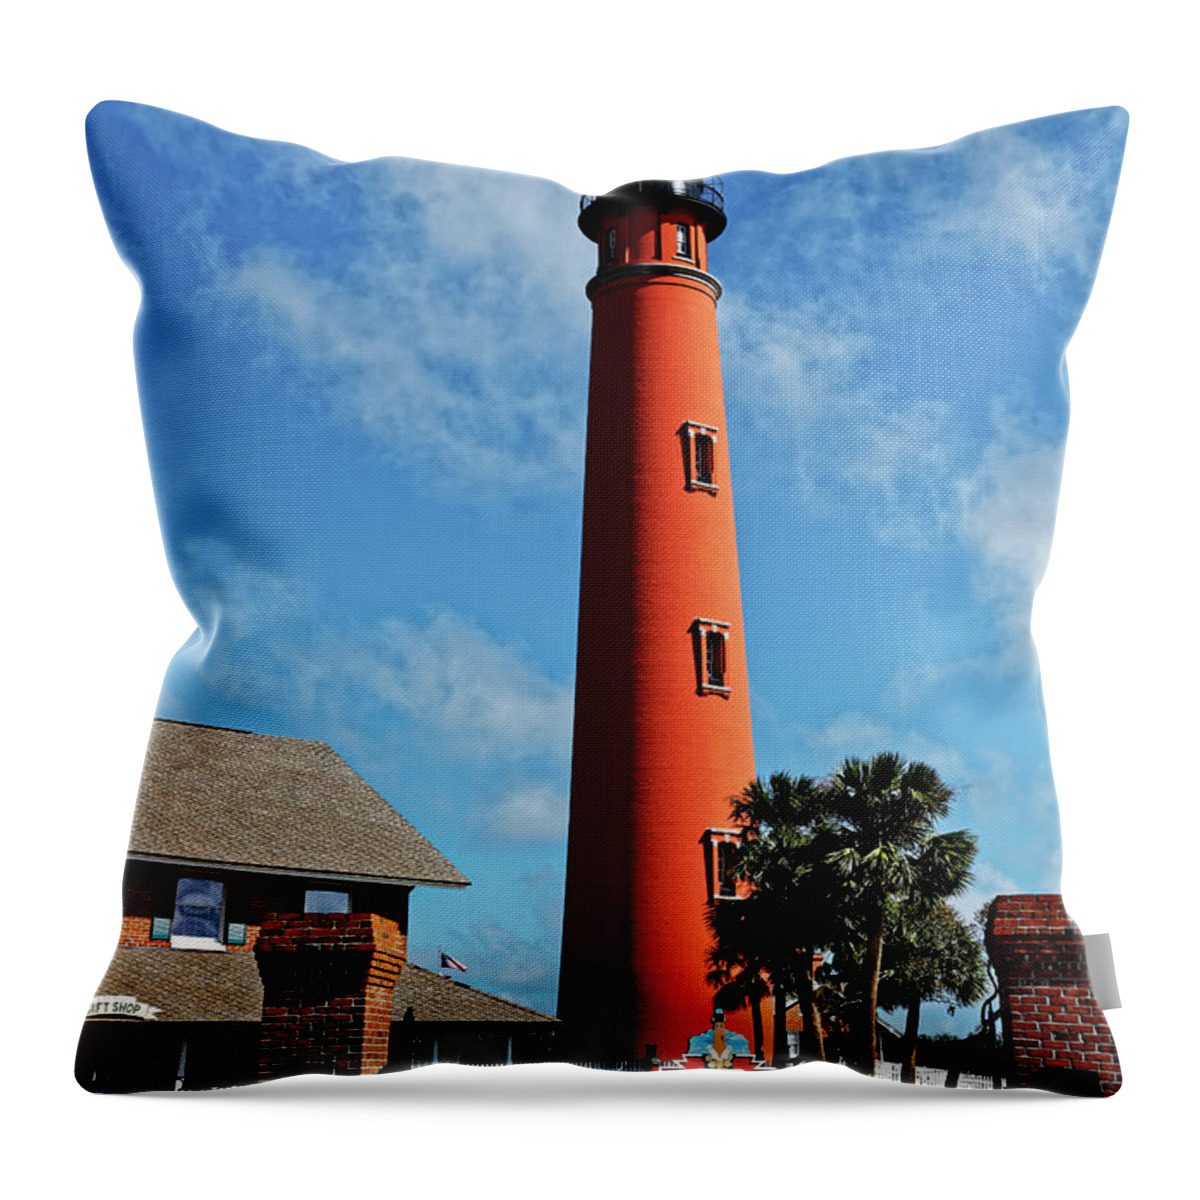 Ponce Inlet Throw Pillow featuring the photograph Ponce Inlet Light by Paul Mashburn